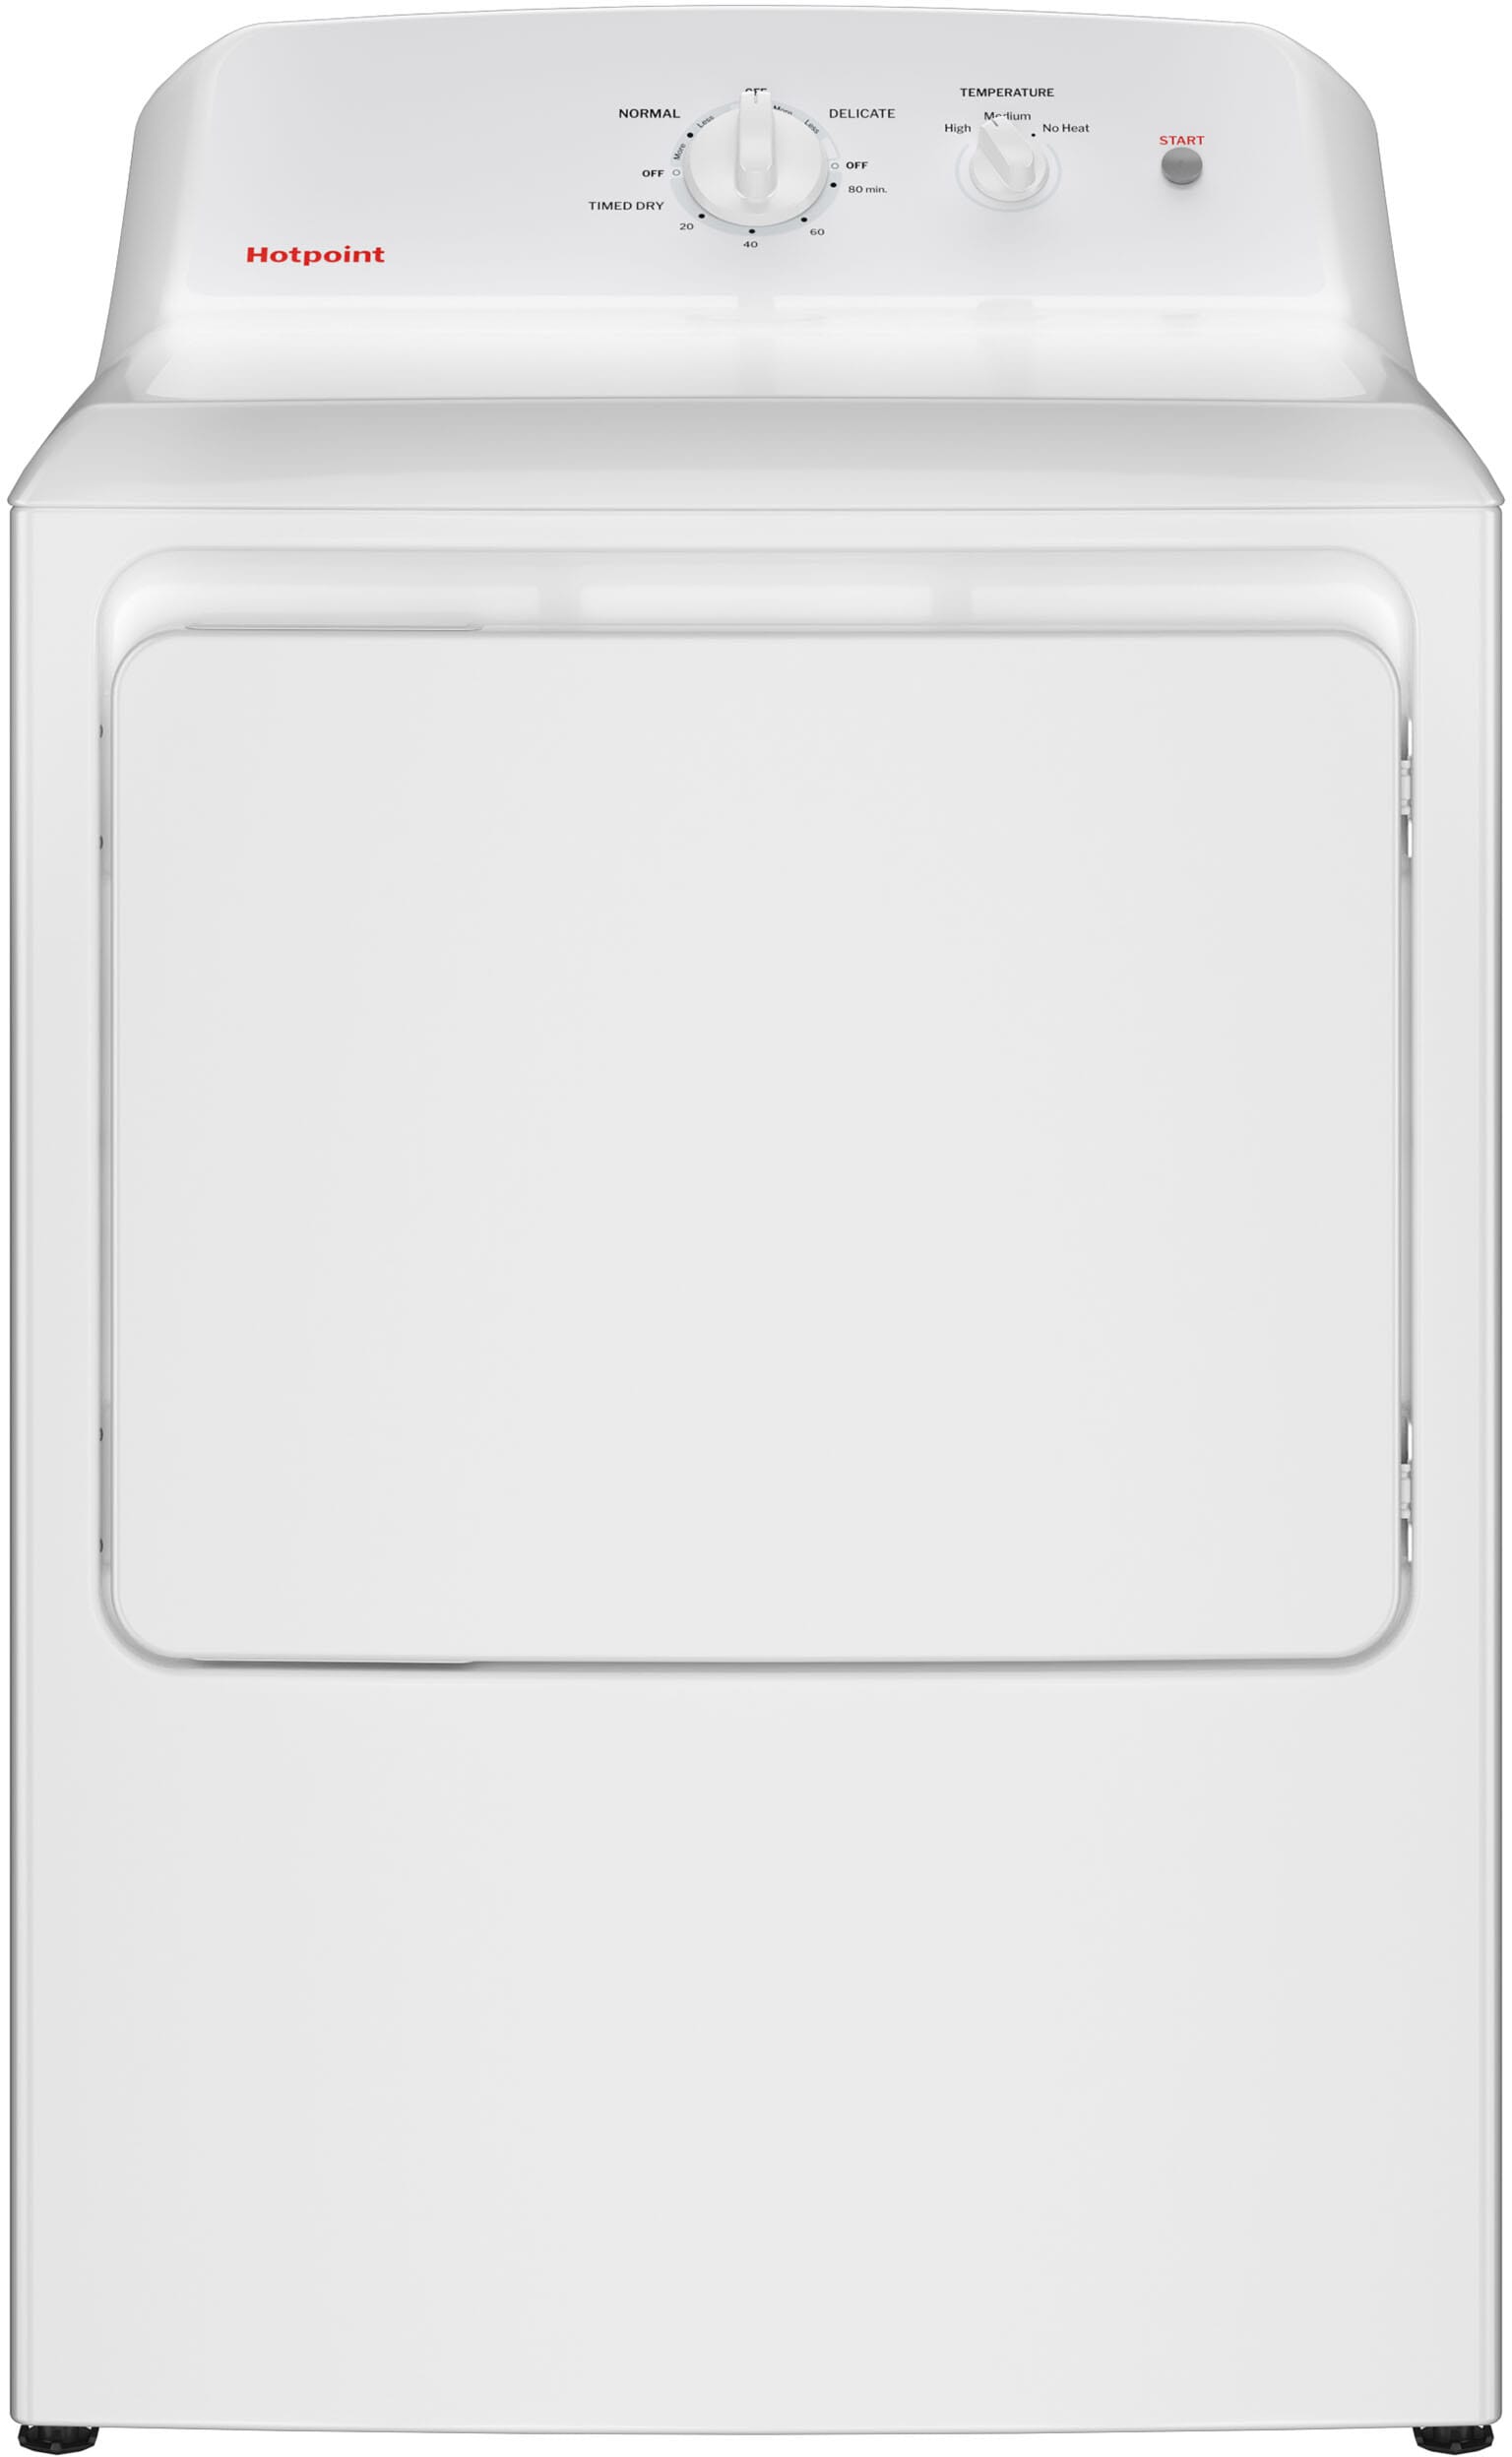 27 Inch Top Load Electric Dryer